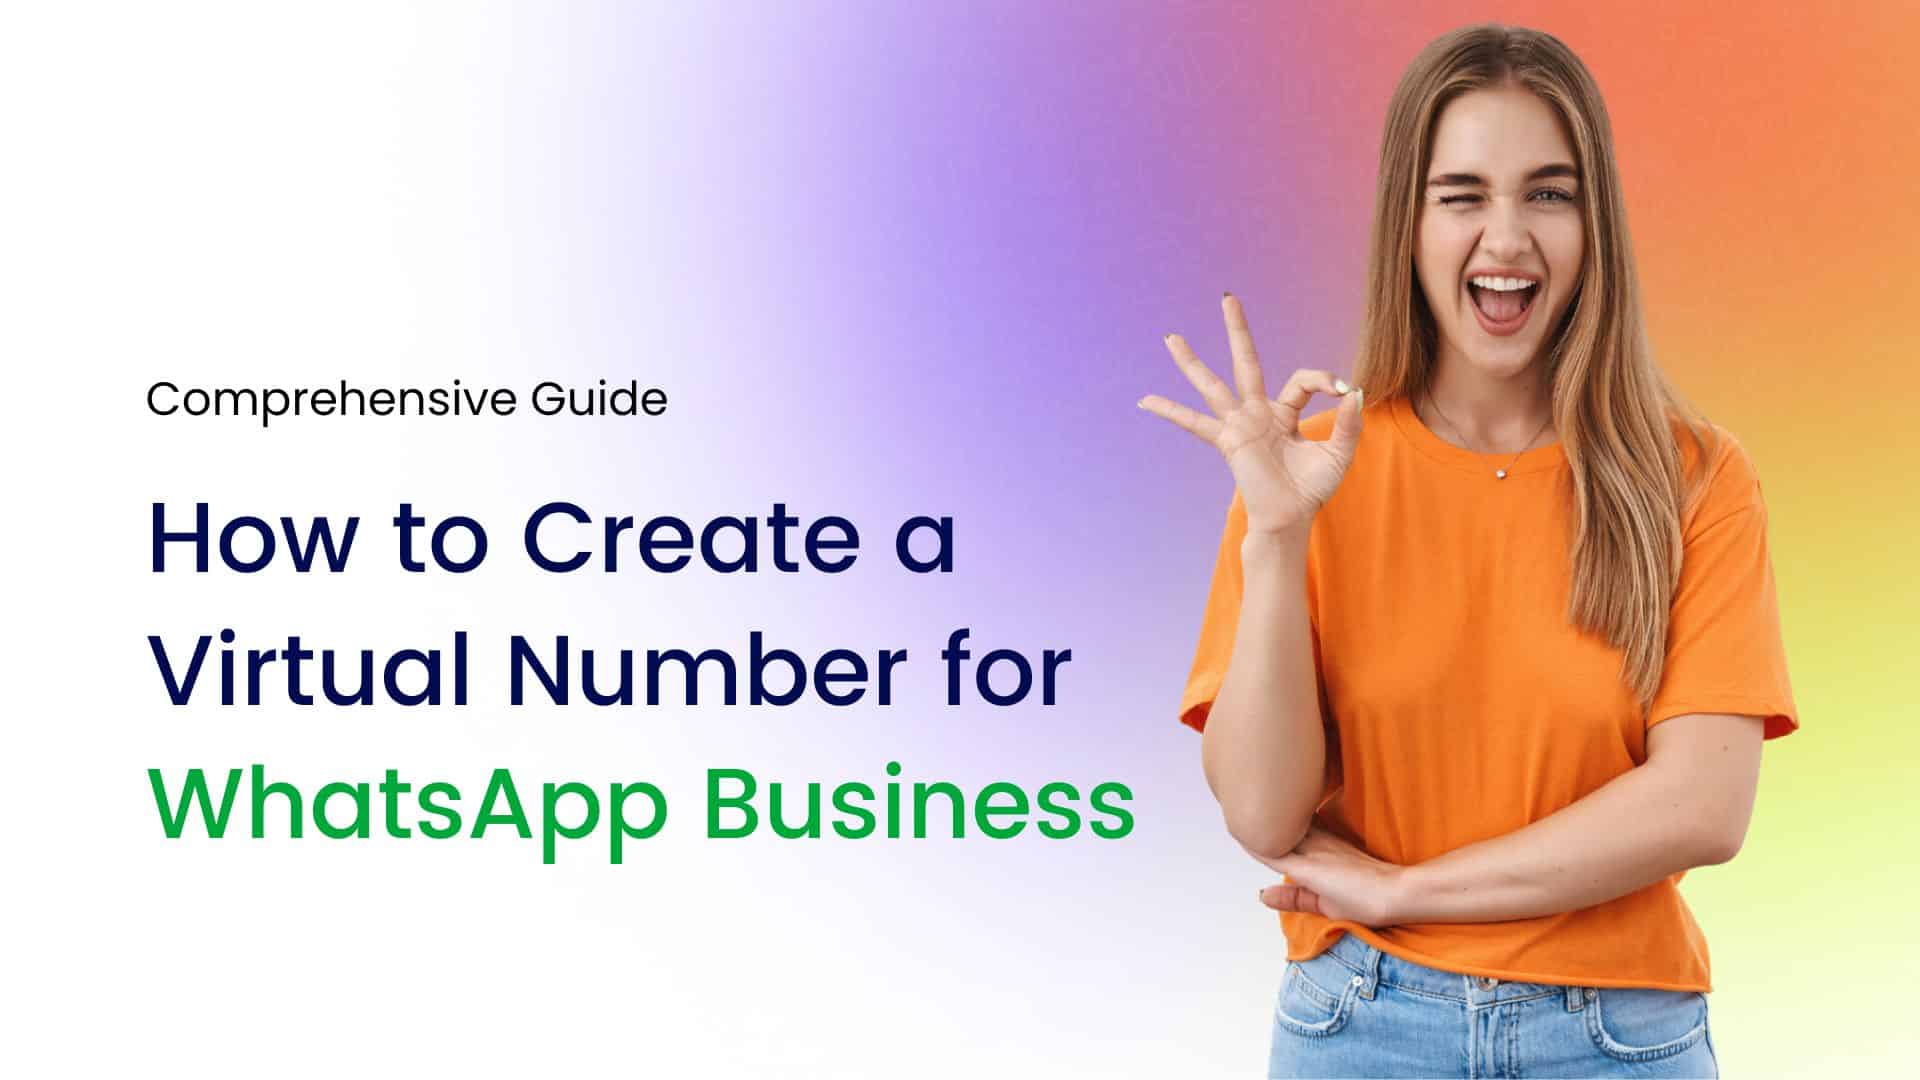 How to Create a Virtual Number for WhatsApp Business